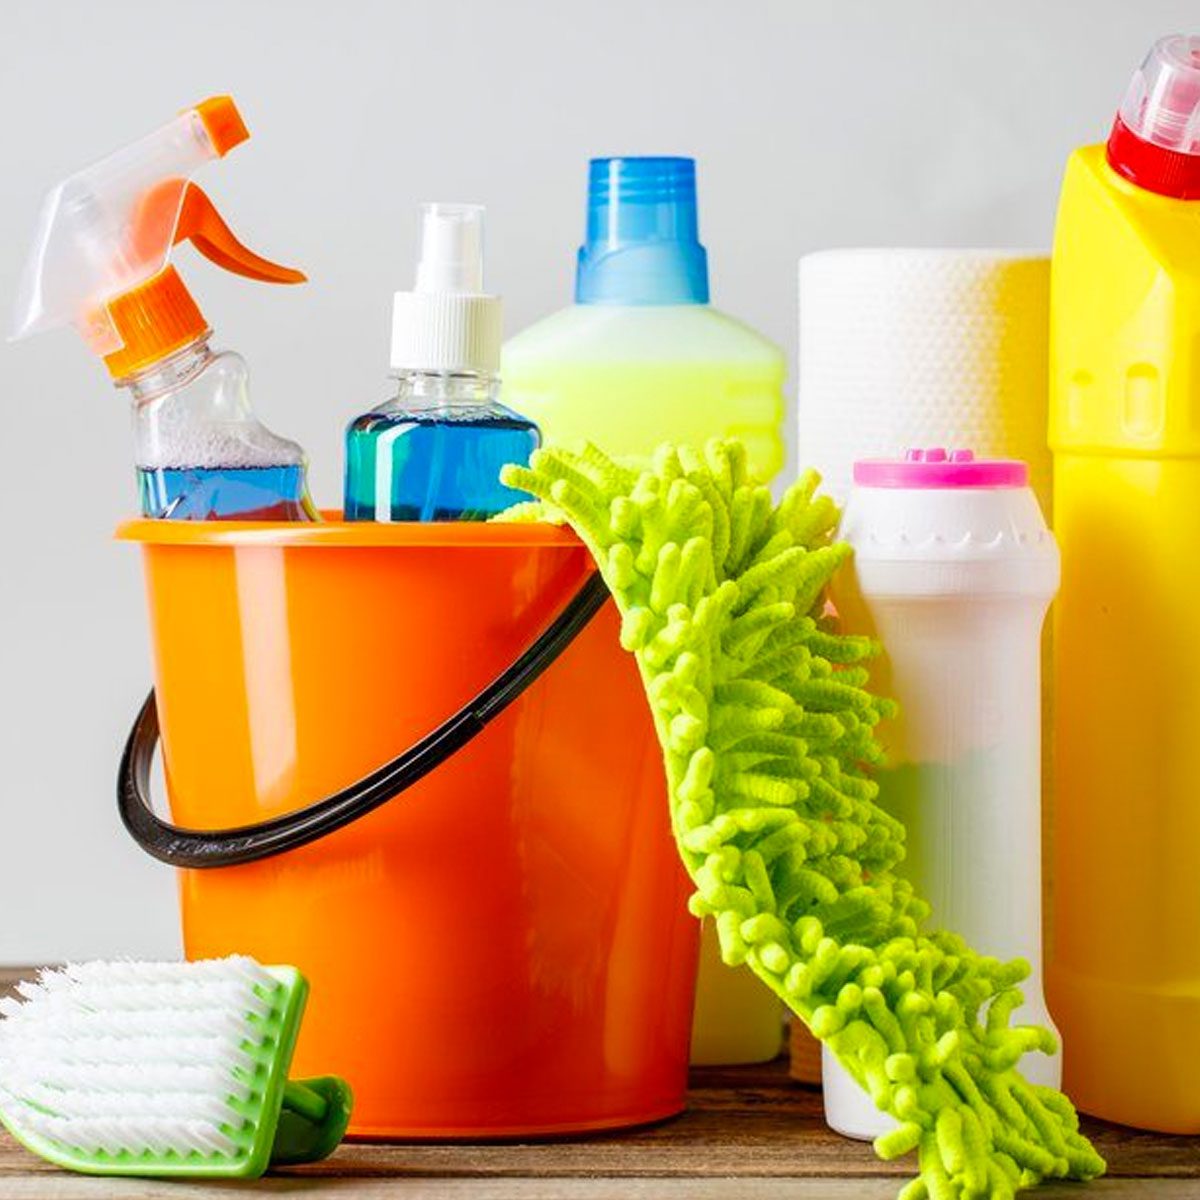 11 Things I Won't Do After Working As A Housecleaner